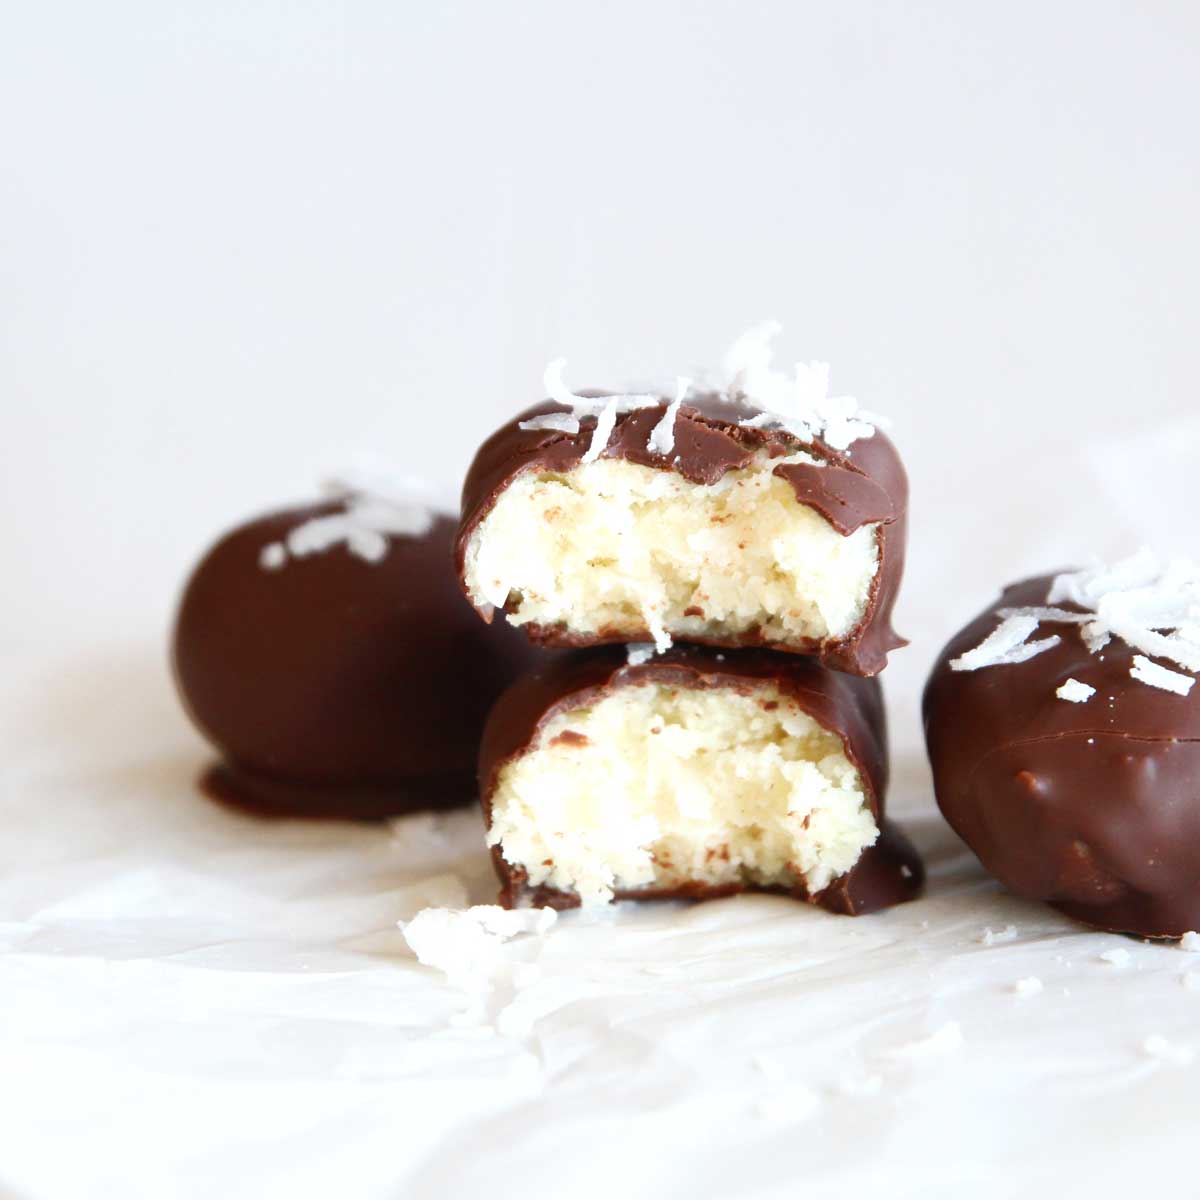 Chocolate Coconut Easter Eggs Made with Collagen Protein Powder - white bean paste cookies